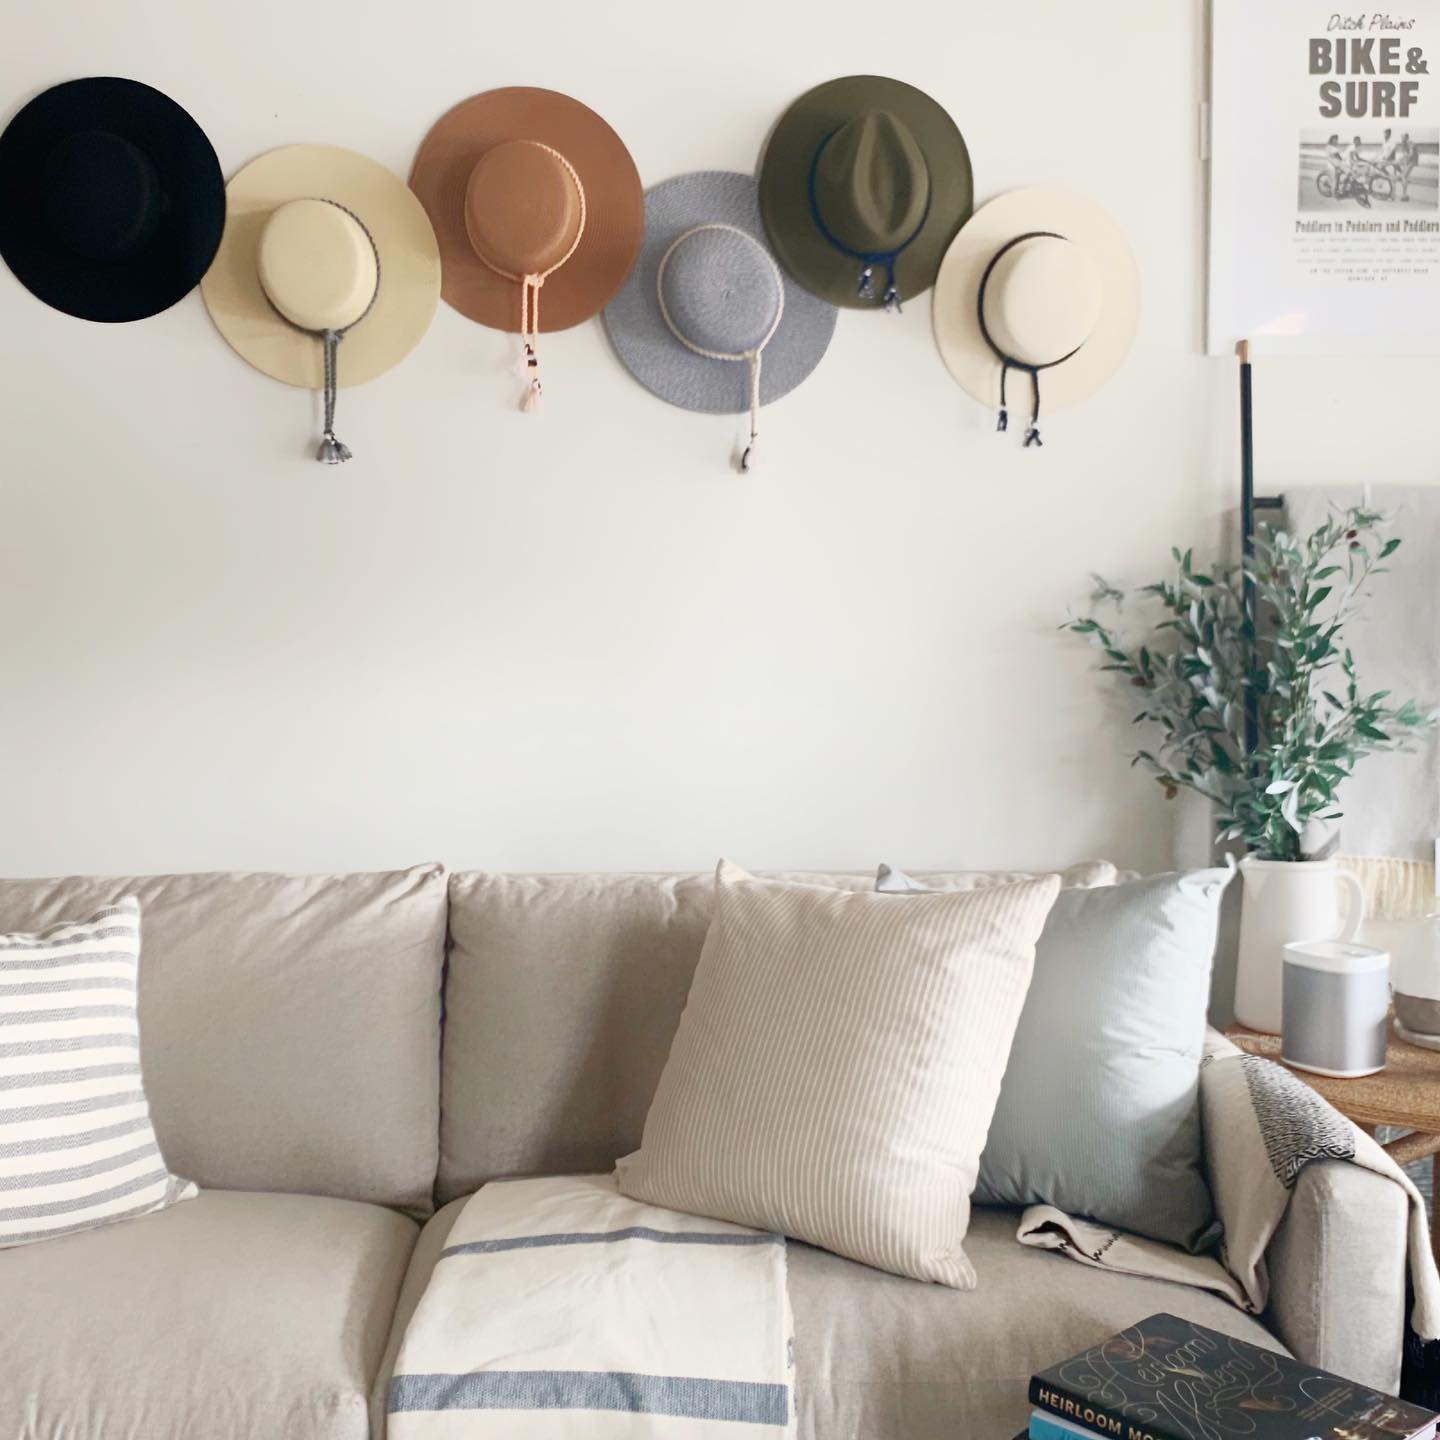 Hats above a couch